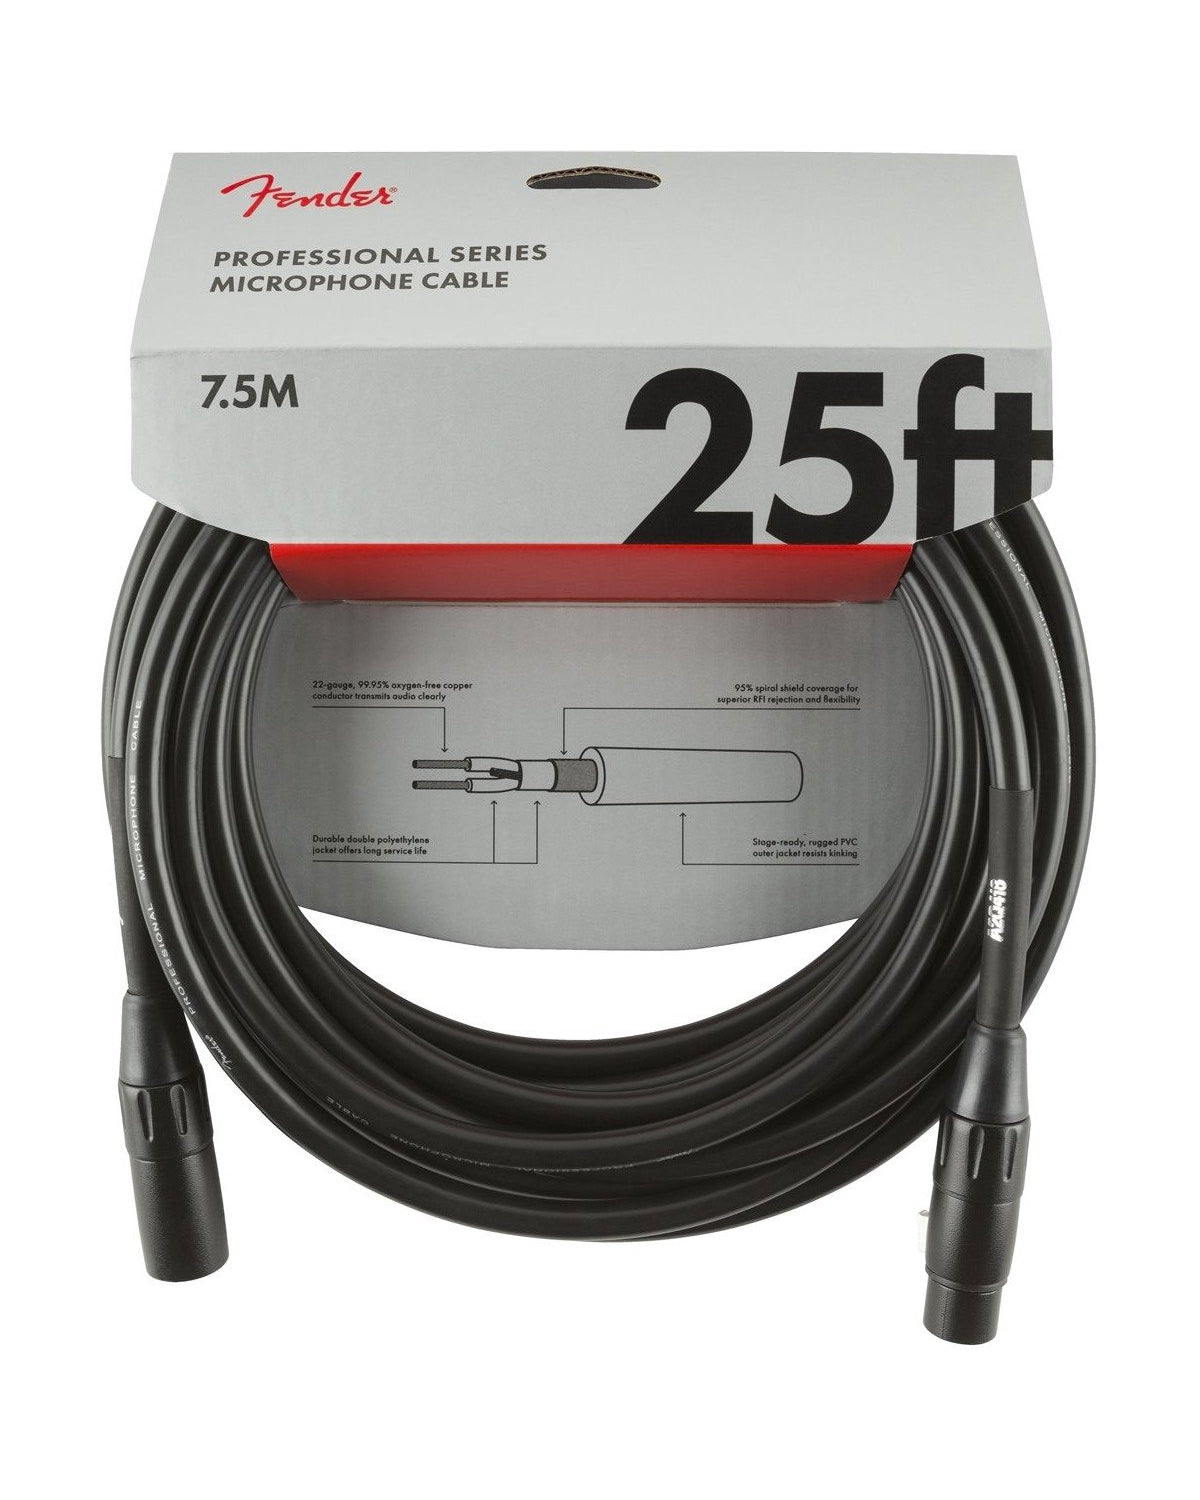 Front of Fender Professional Series Microphone Cable in packaging